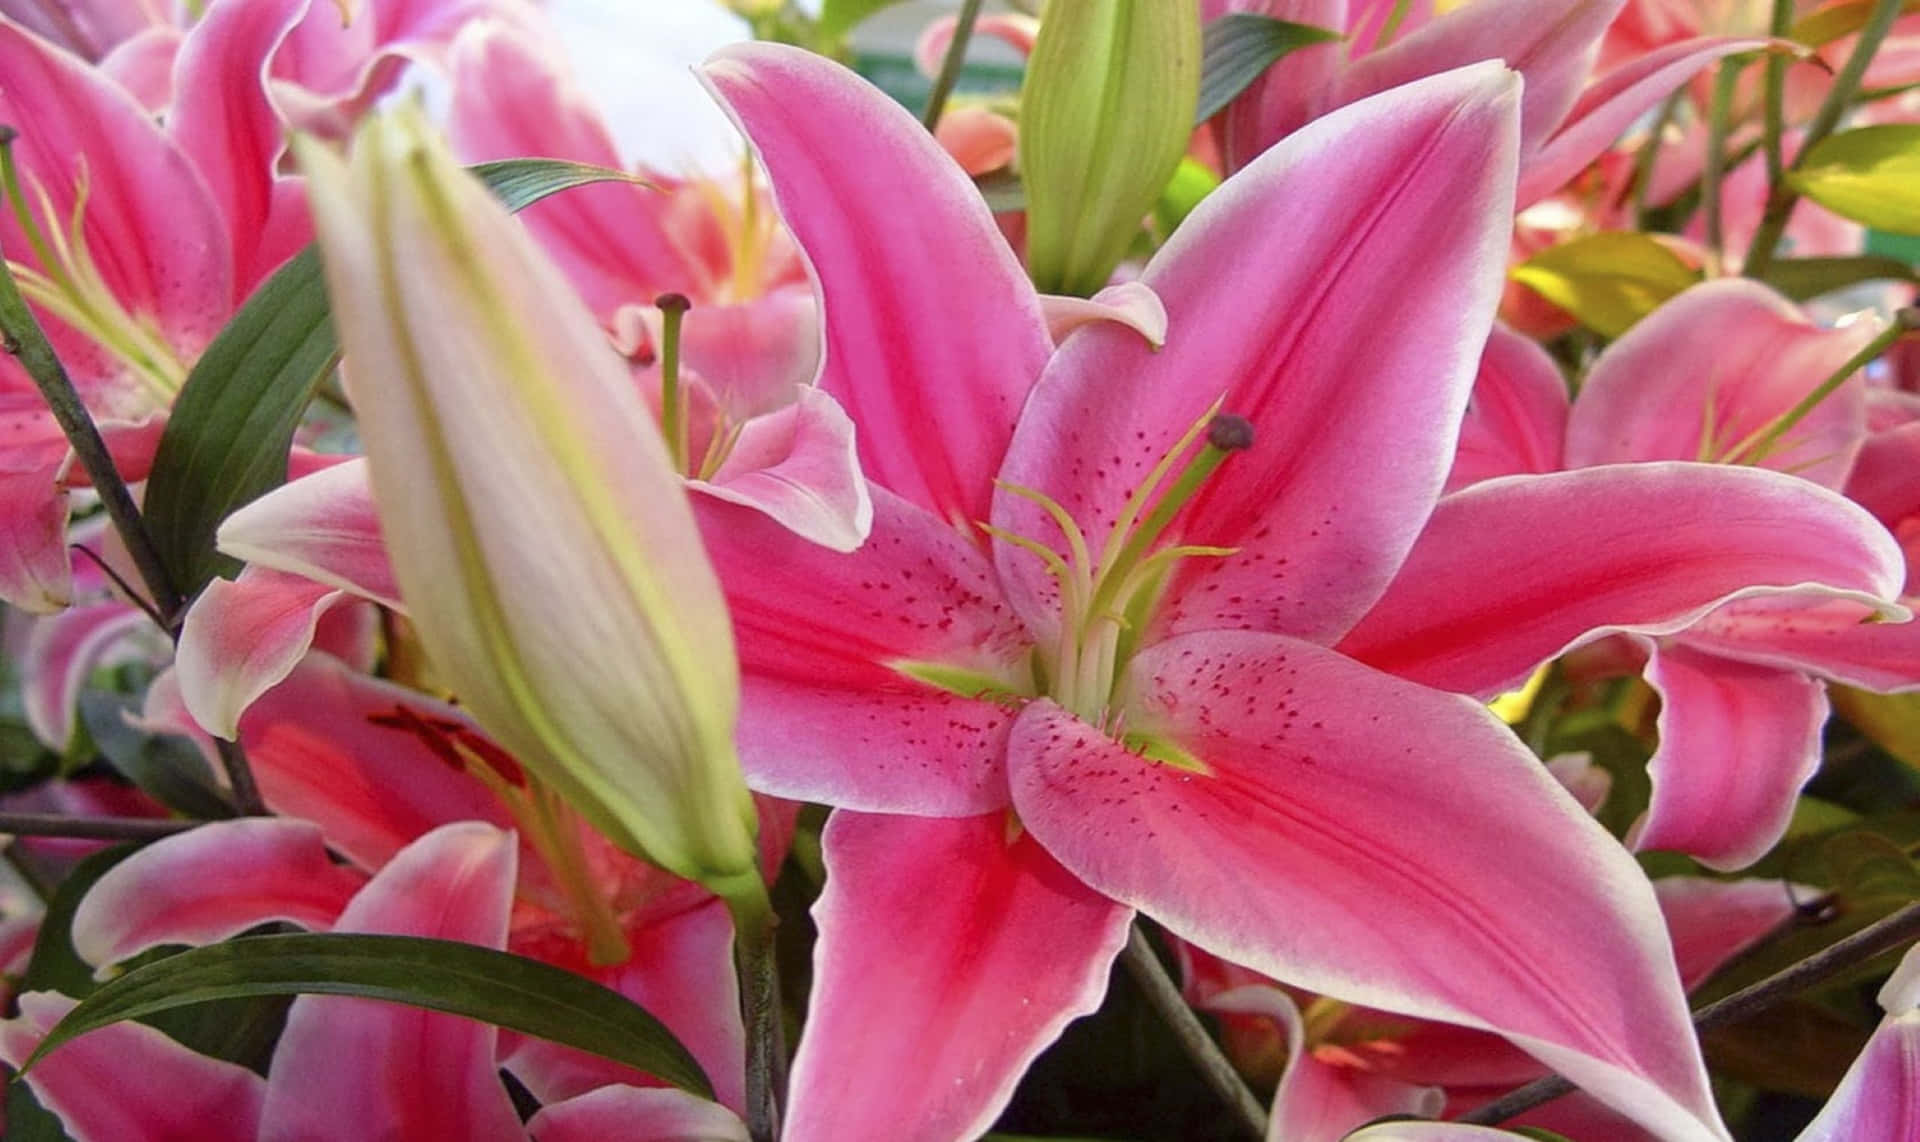 A beautiful pink lily flower blooming in the sunshine